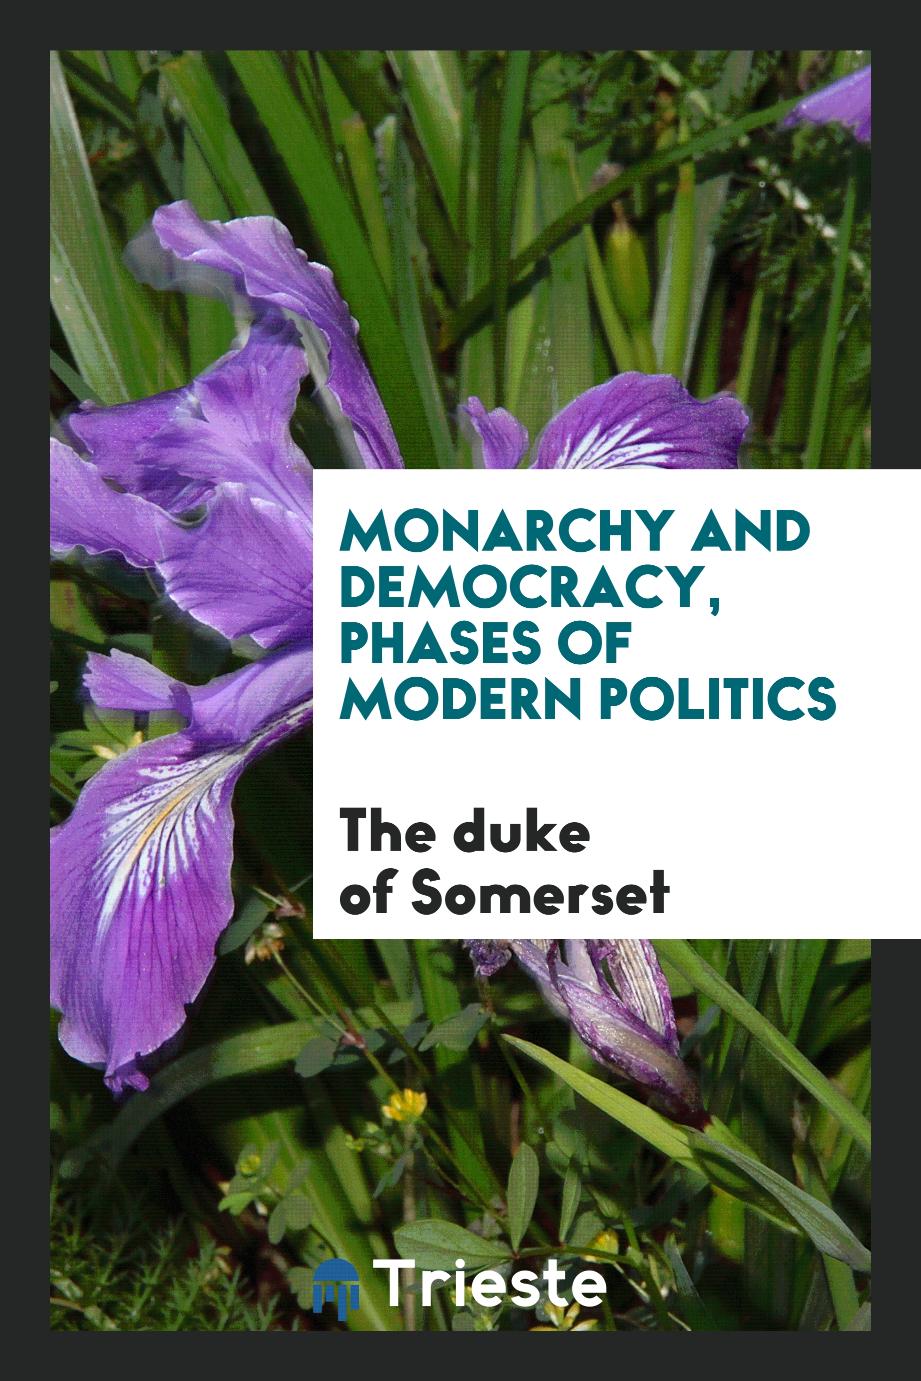 Monarchy and democracy, phases of modern politics